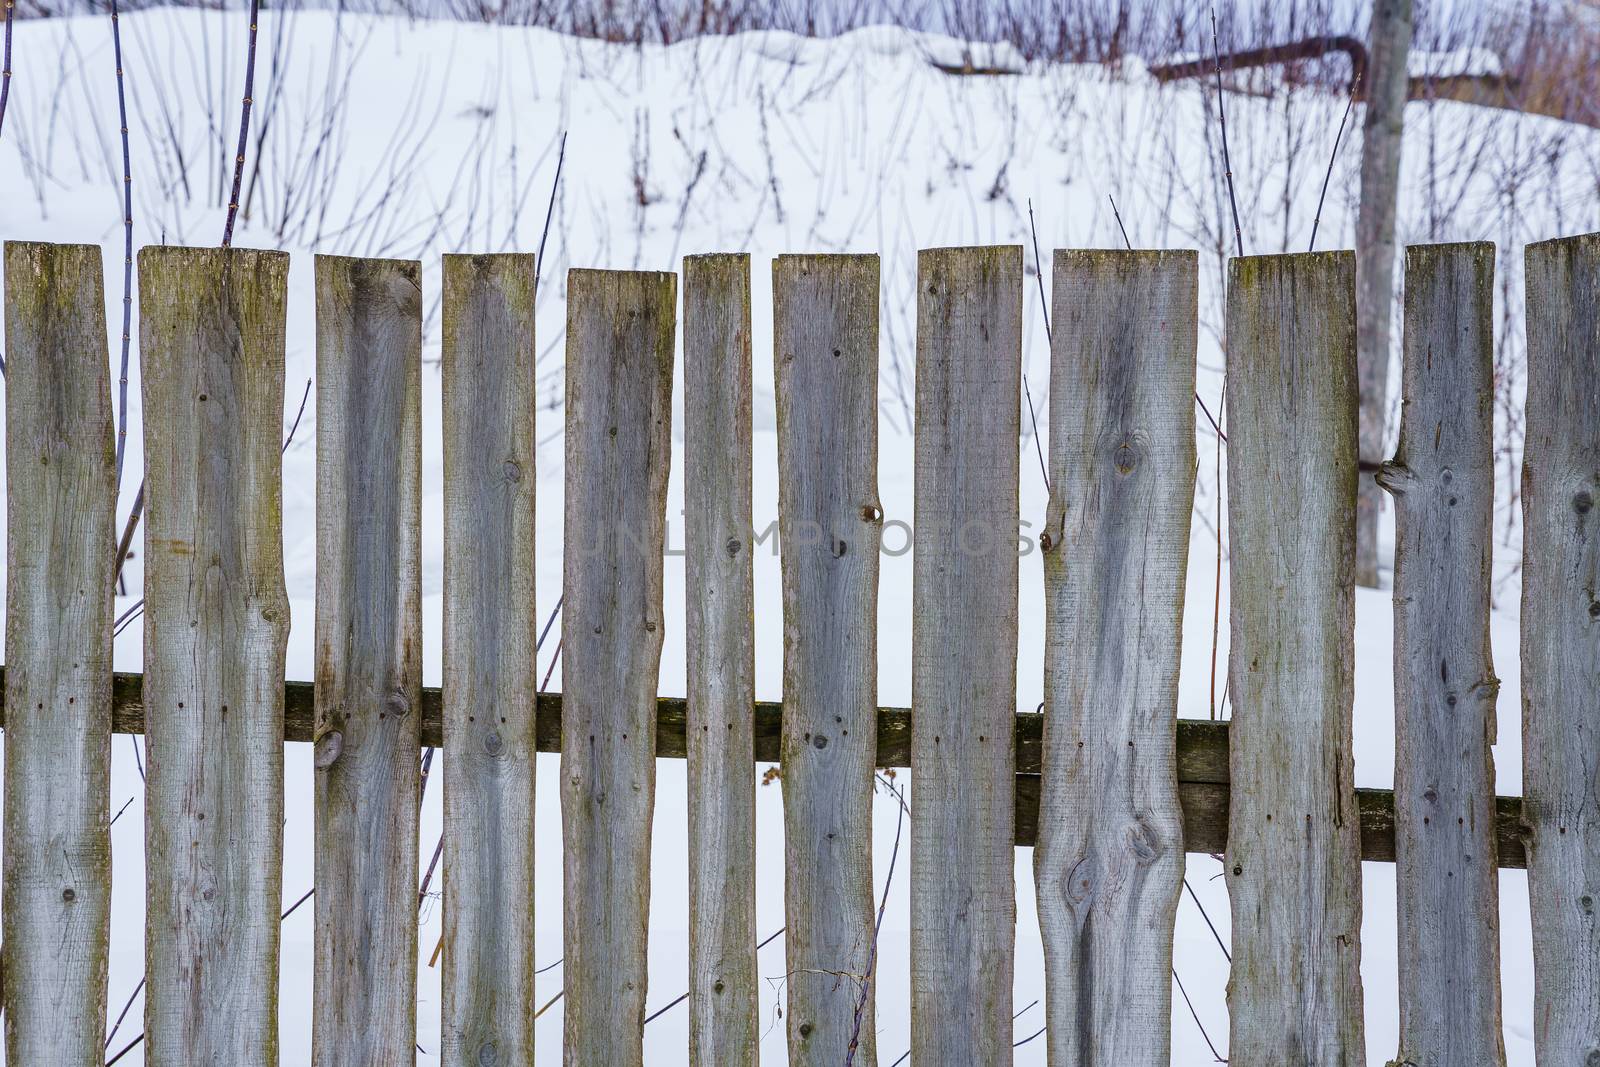 wooden fence of boards nailed to the crossbar on a winter day